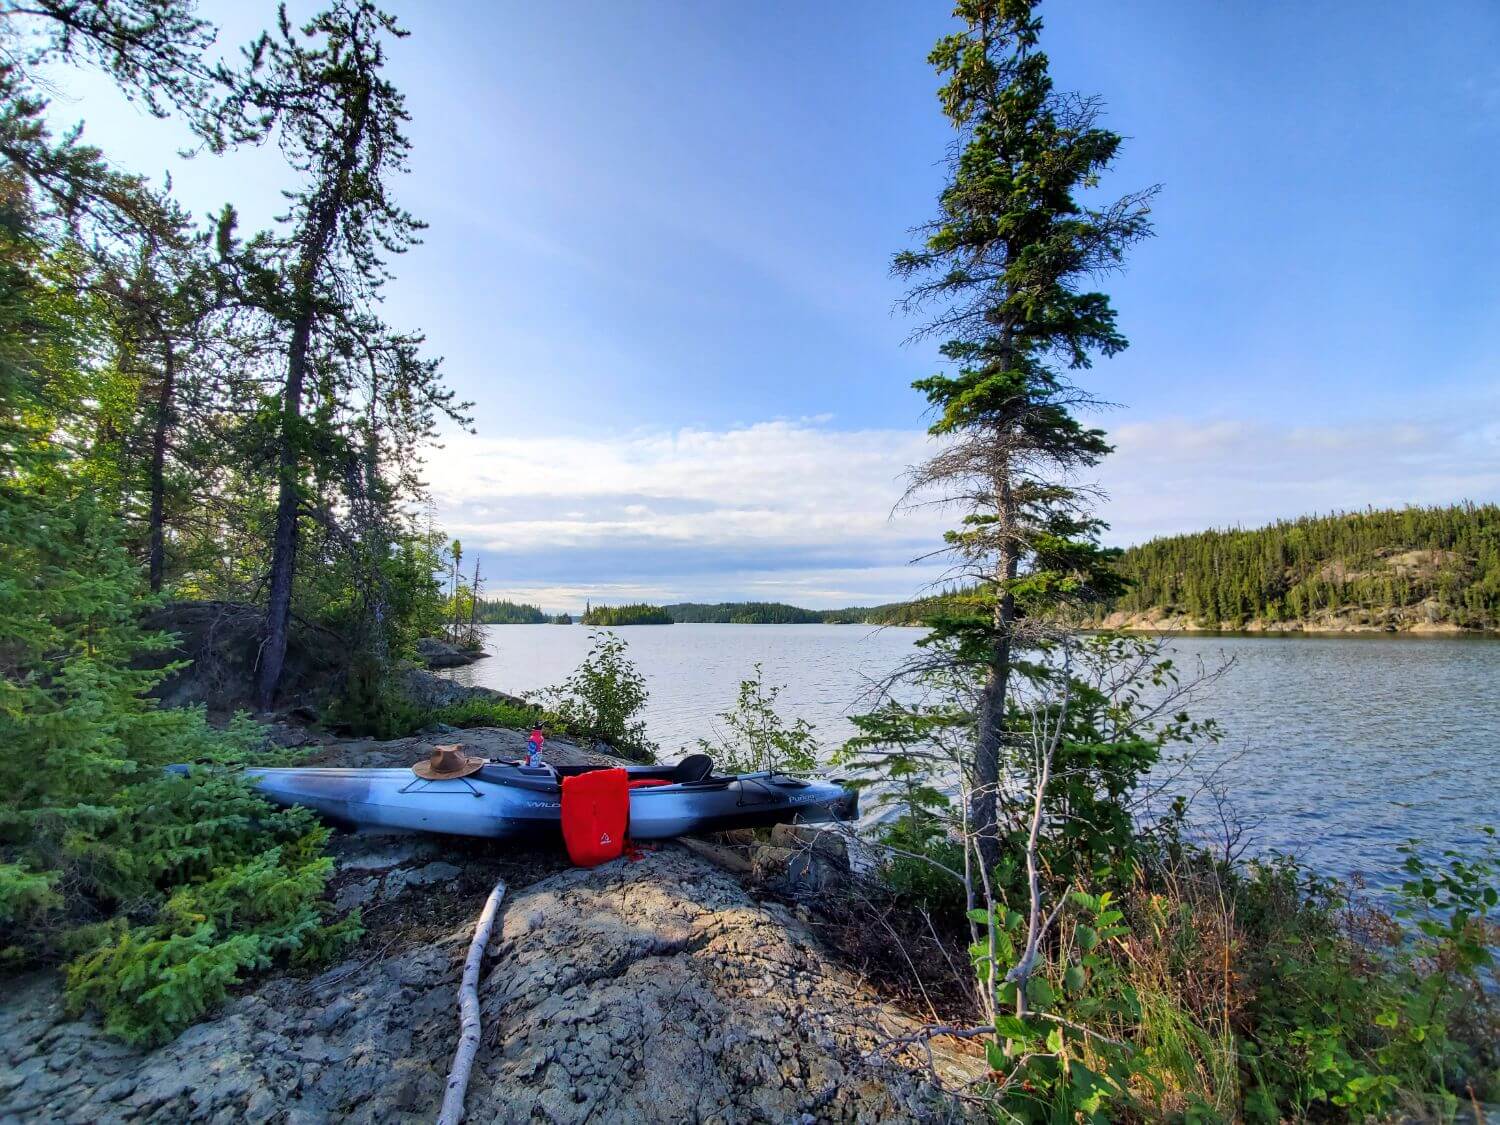 A grey kayak sits on a rocky shoreline surrounded by spruce trees. A hat, water bottle, and red backpack sit atop the kayak. A blue sky and lake are visible in the background.